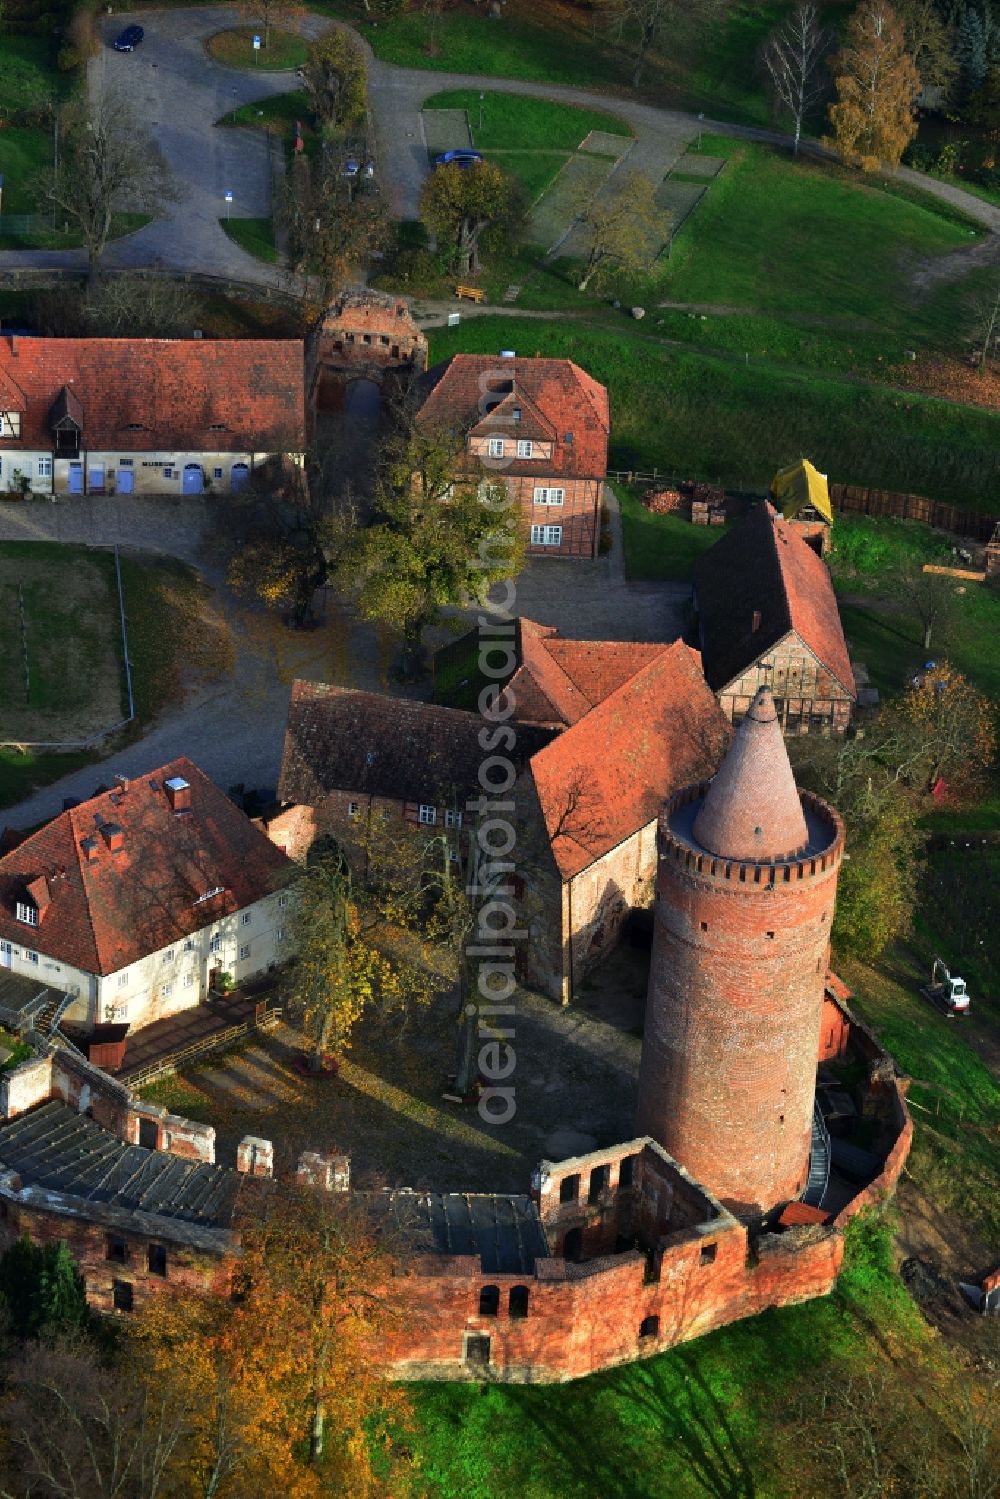 Aerial photograph Burg Stargard - Autumn scenery at the Burg Stargard in the state of Mecklenburg-Western Pomerania. The landmark of the city of the same name is the oldest secular building in Mecklenburg - Western Pomerania and the northernmost preserved hilltop castle in Germany